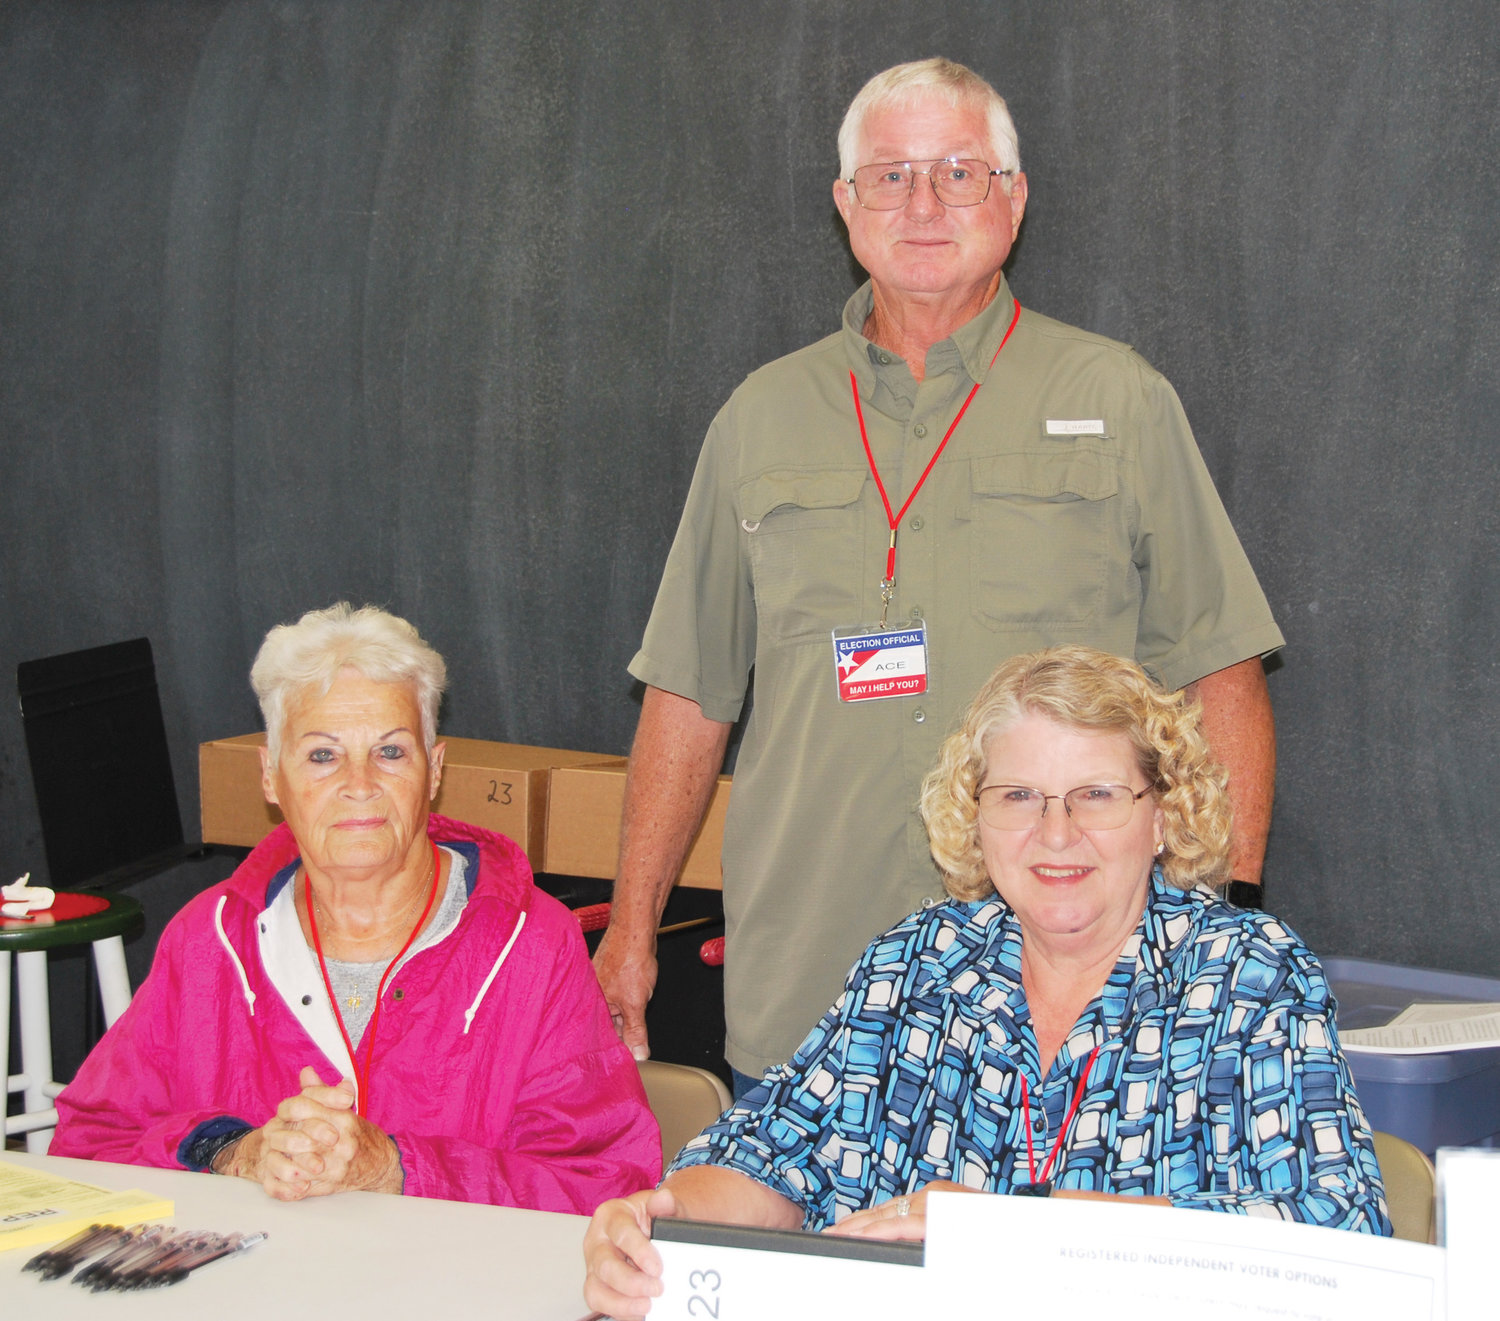 Election officials at the Emmanuel Baptist Church precinct during Tuesday’s primary election were inspector Ace Dennis, judge Judy Dennis and clerk Nell Hill.